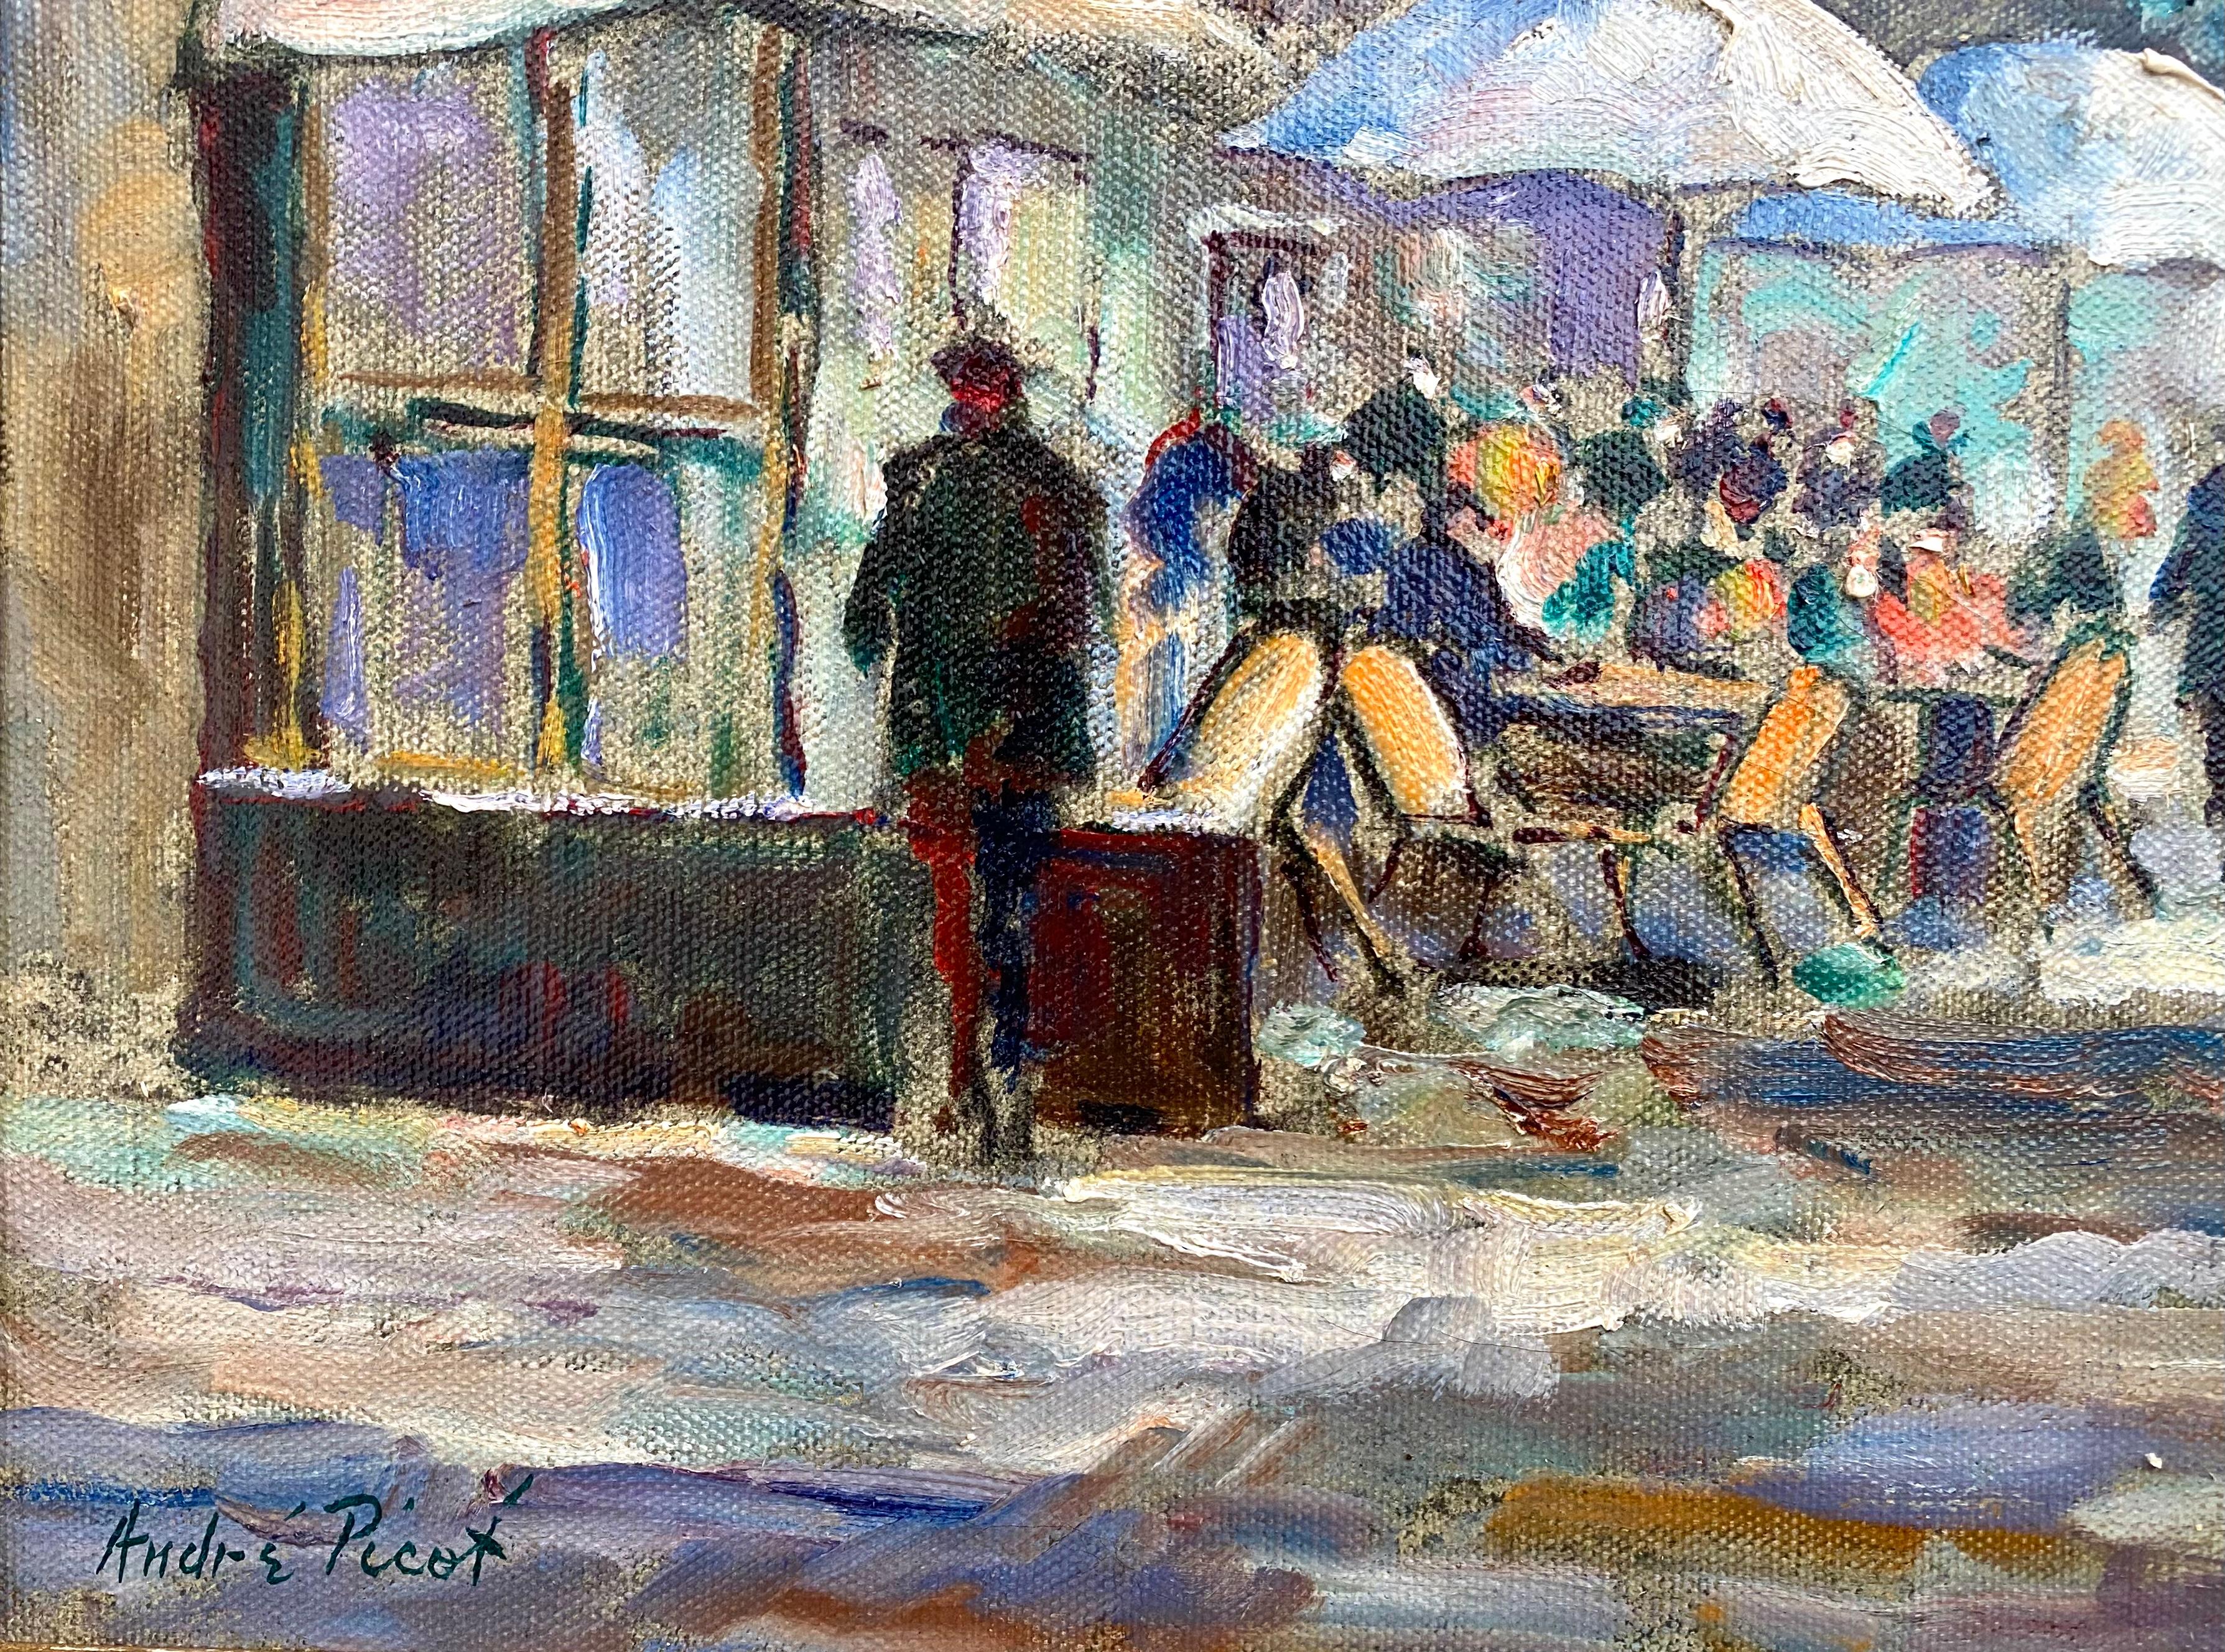 “Cafe Pepinier, Paris - Post-Impressionist Painting by André Picot